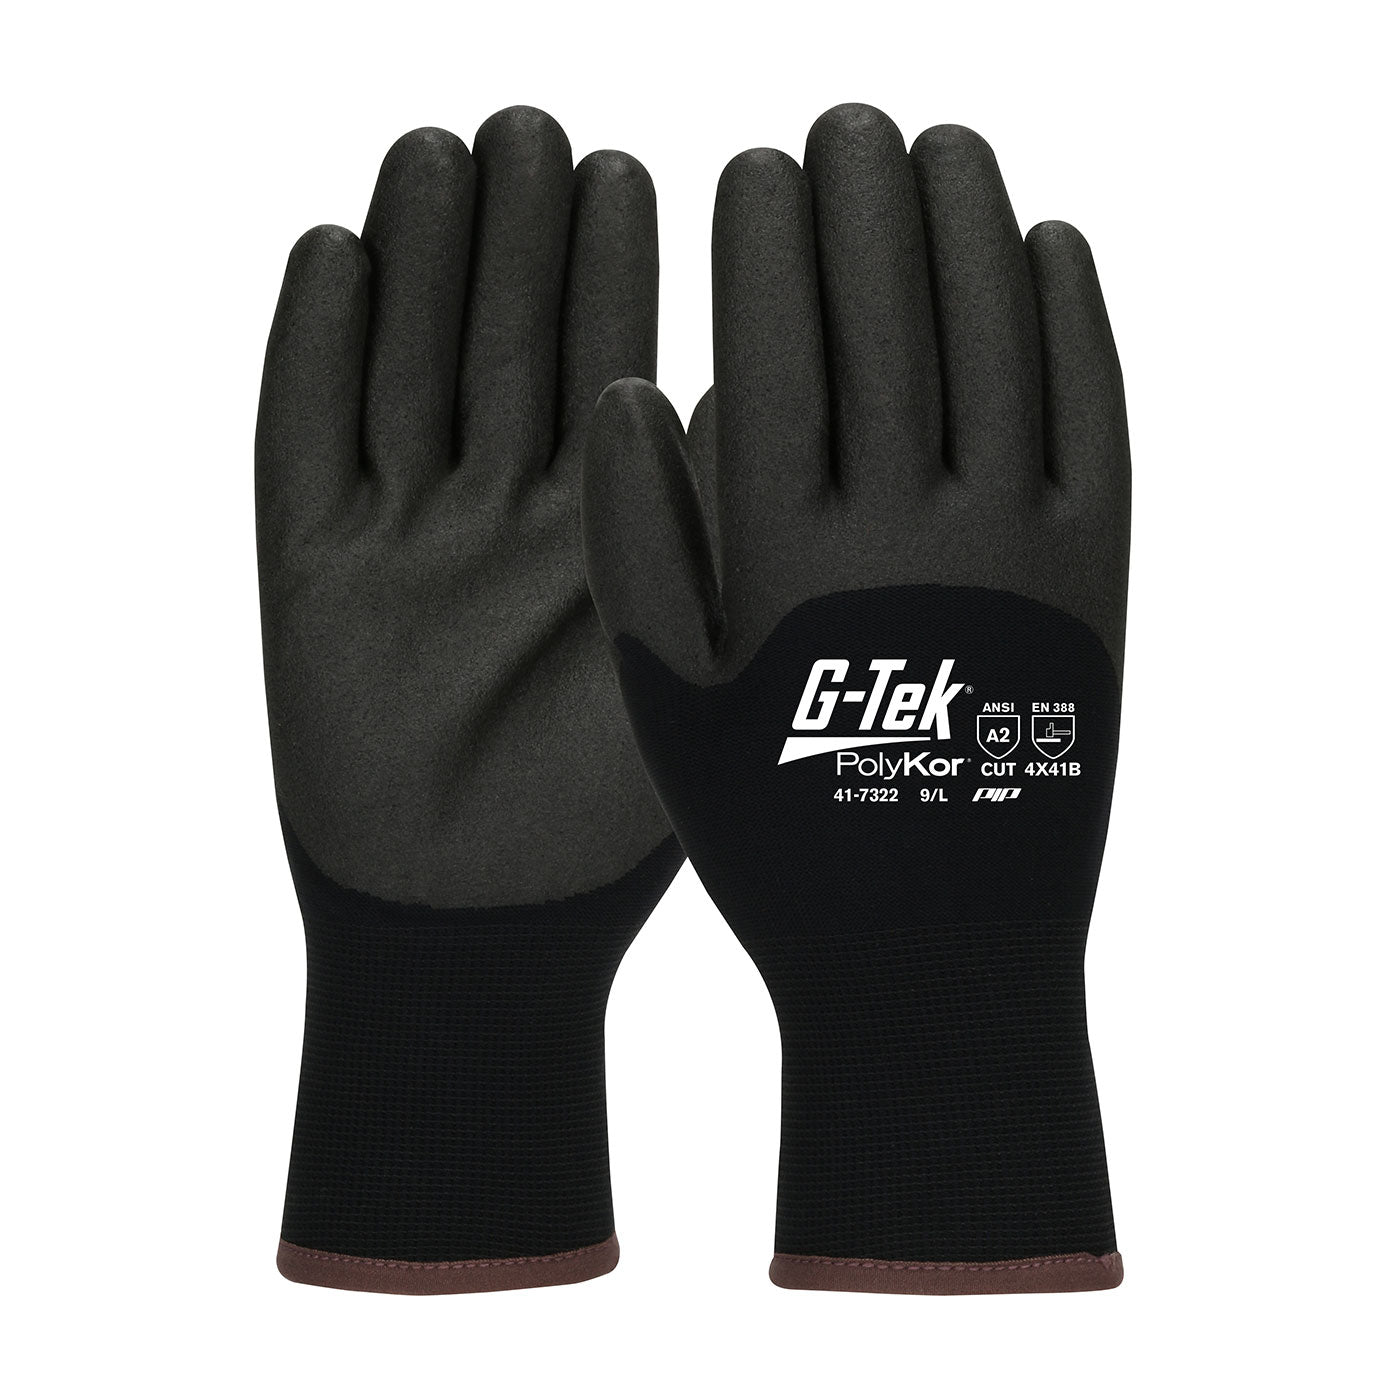 G-Tek 41-7322/XXL Seamless Knit PolyKor Blend Glove with Acrylic Lining and PVC Foam Grip on Palm, Fingers & Knuckles